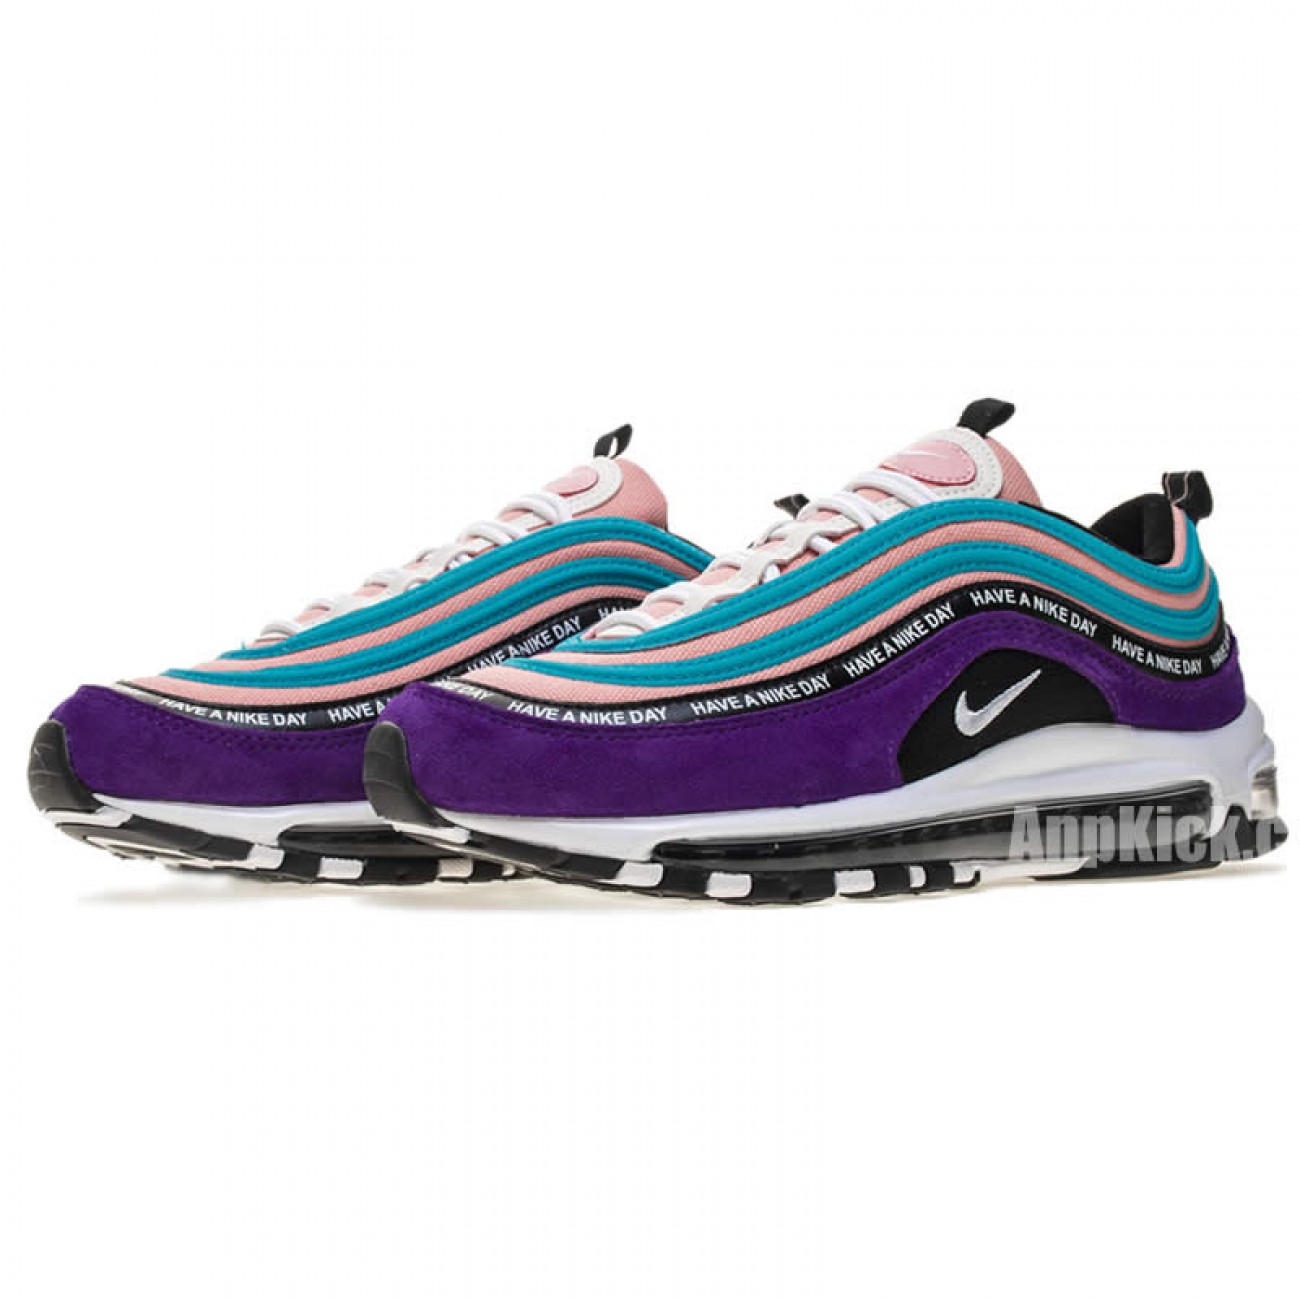 Nike Air Max 97 Purple Navy Blue "Have a Nike Day" Mens Womens 97s Shoes BQ9130-400